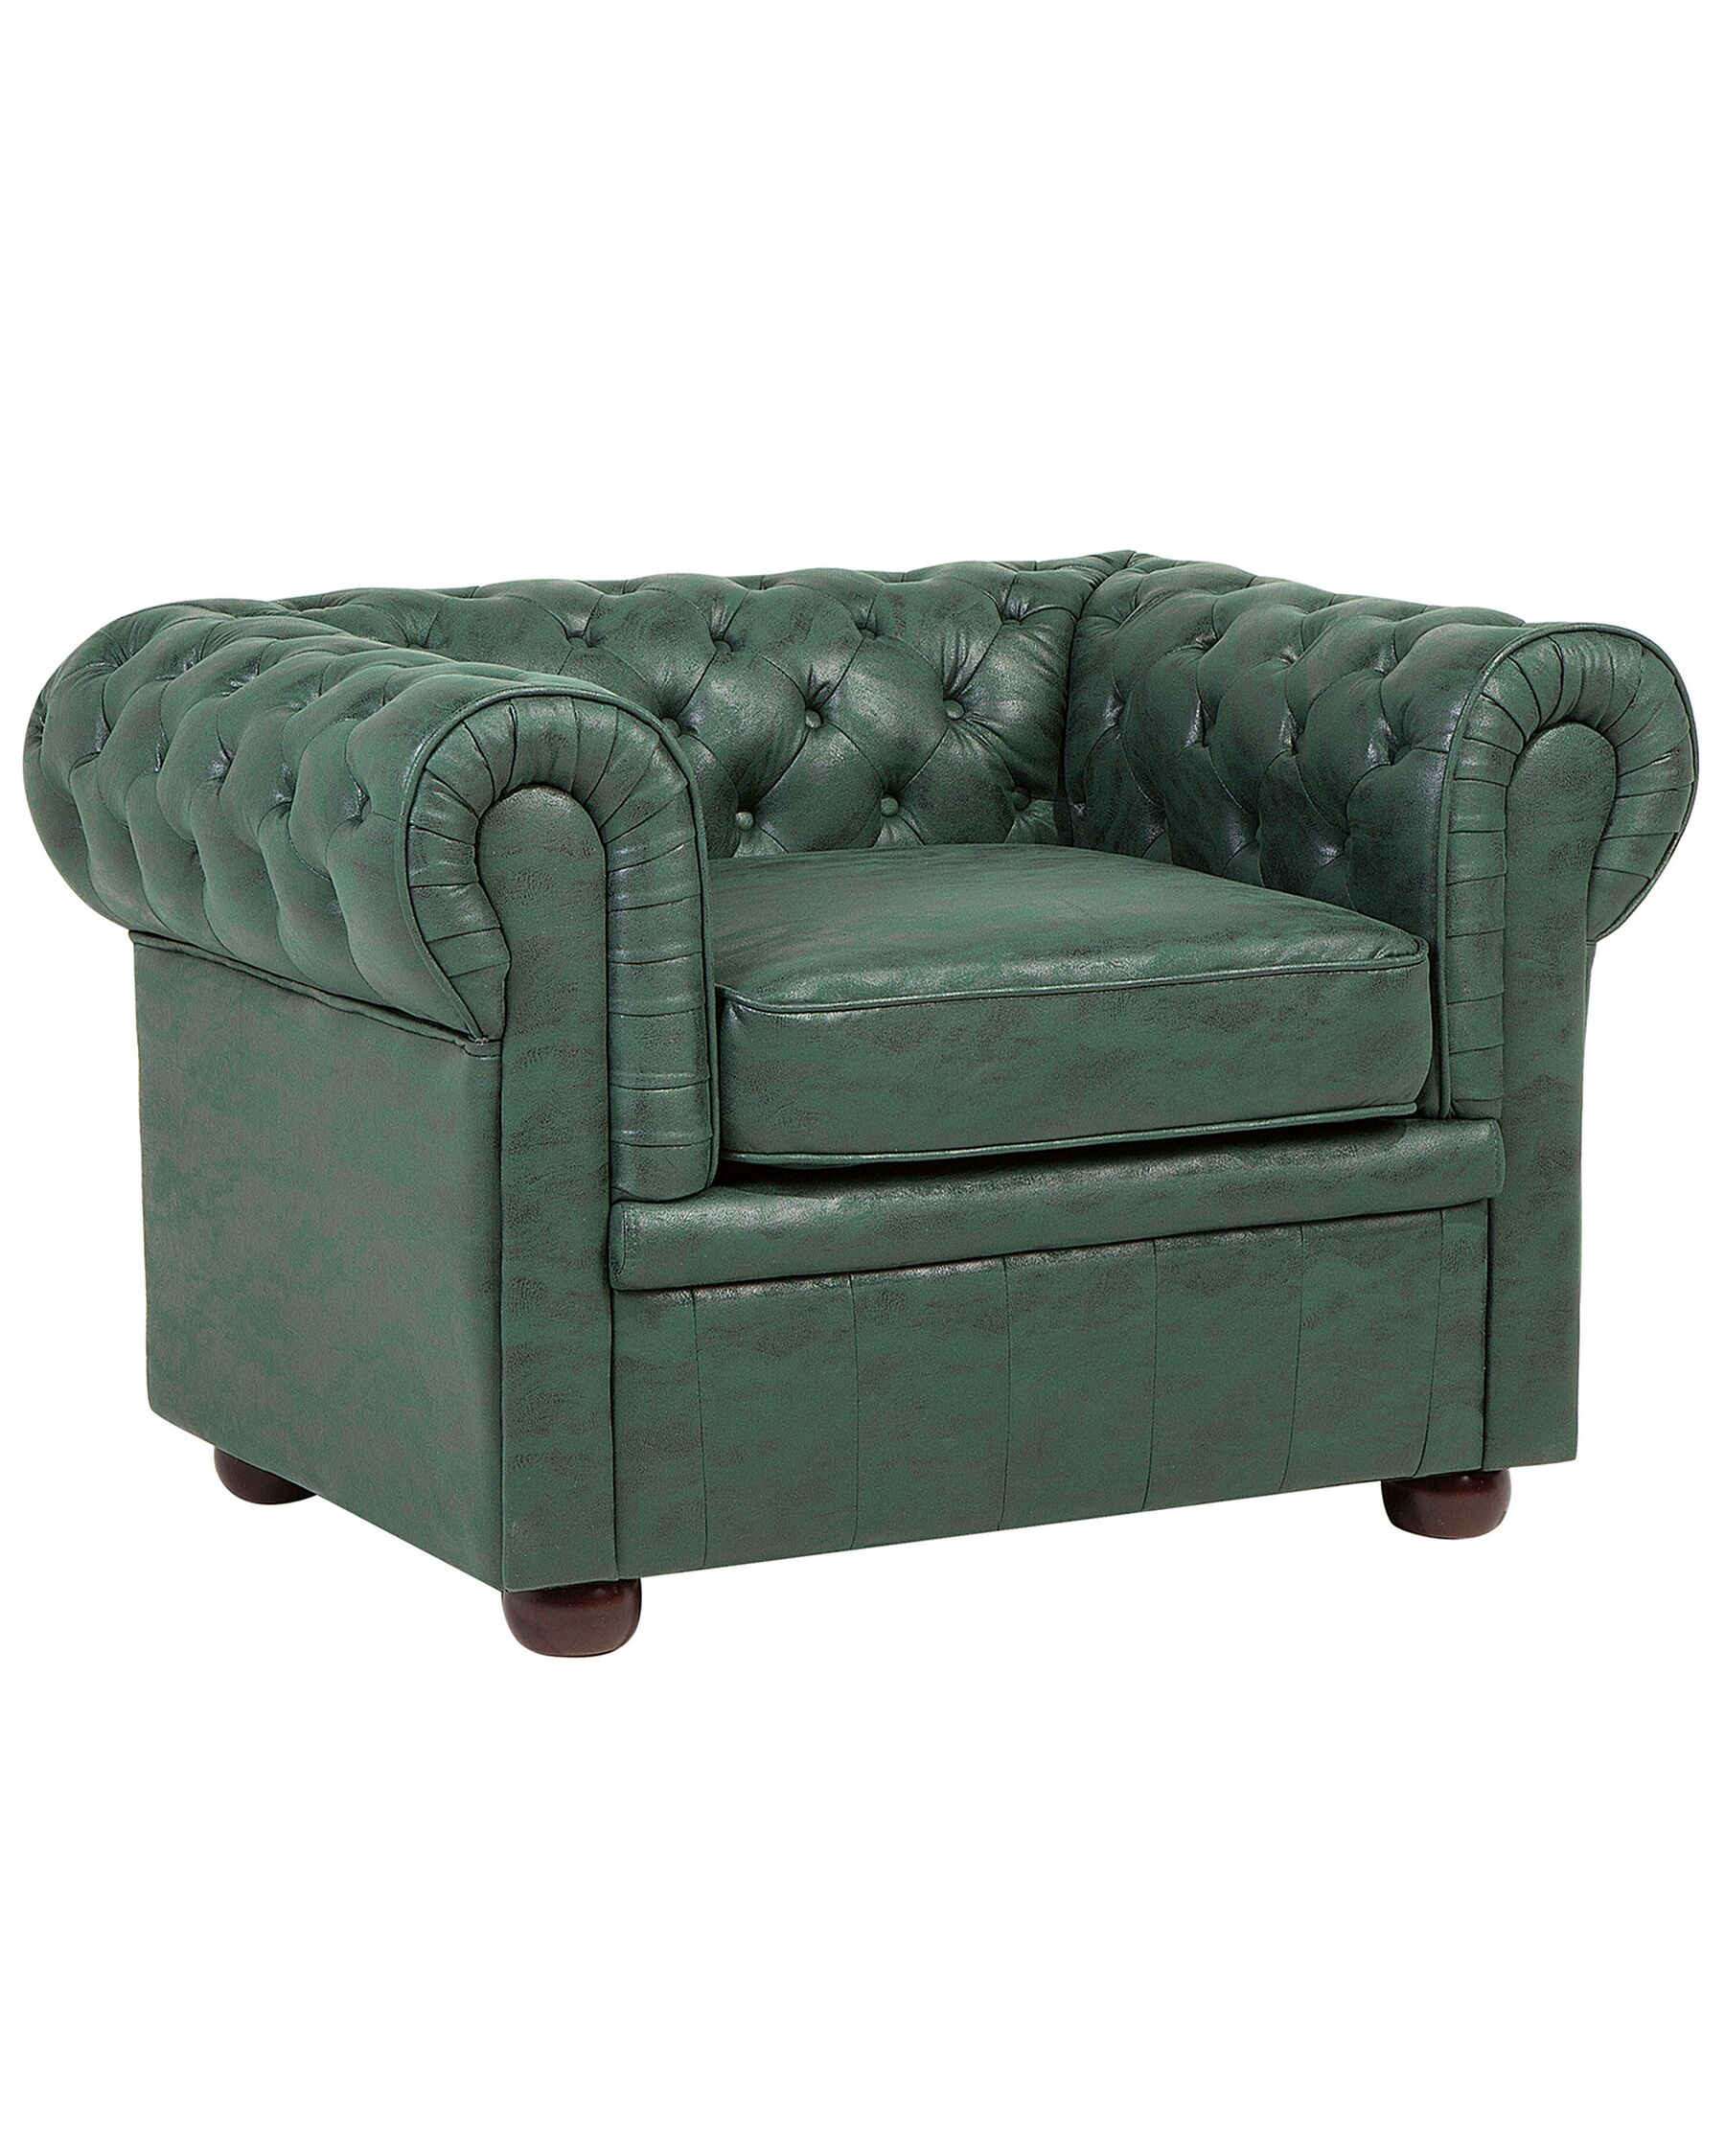 Classic English Chesterfield Armchair Button Tufted Air Leather Green